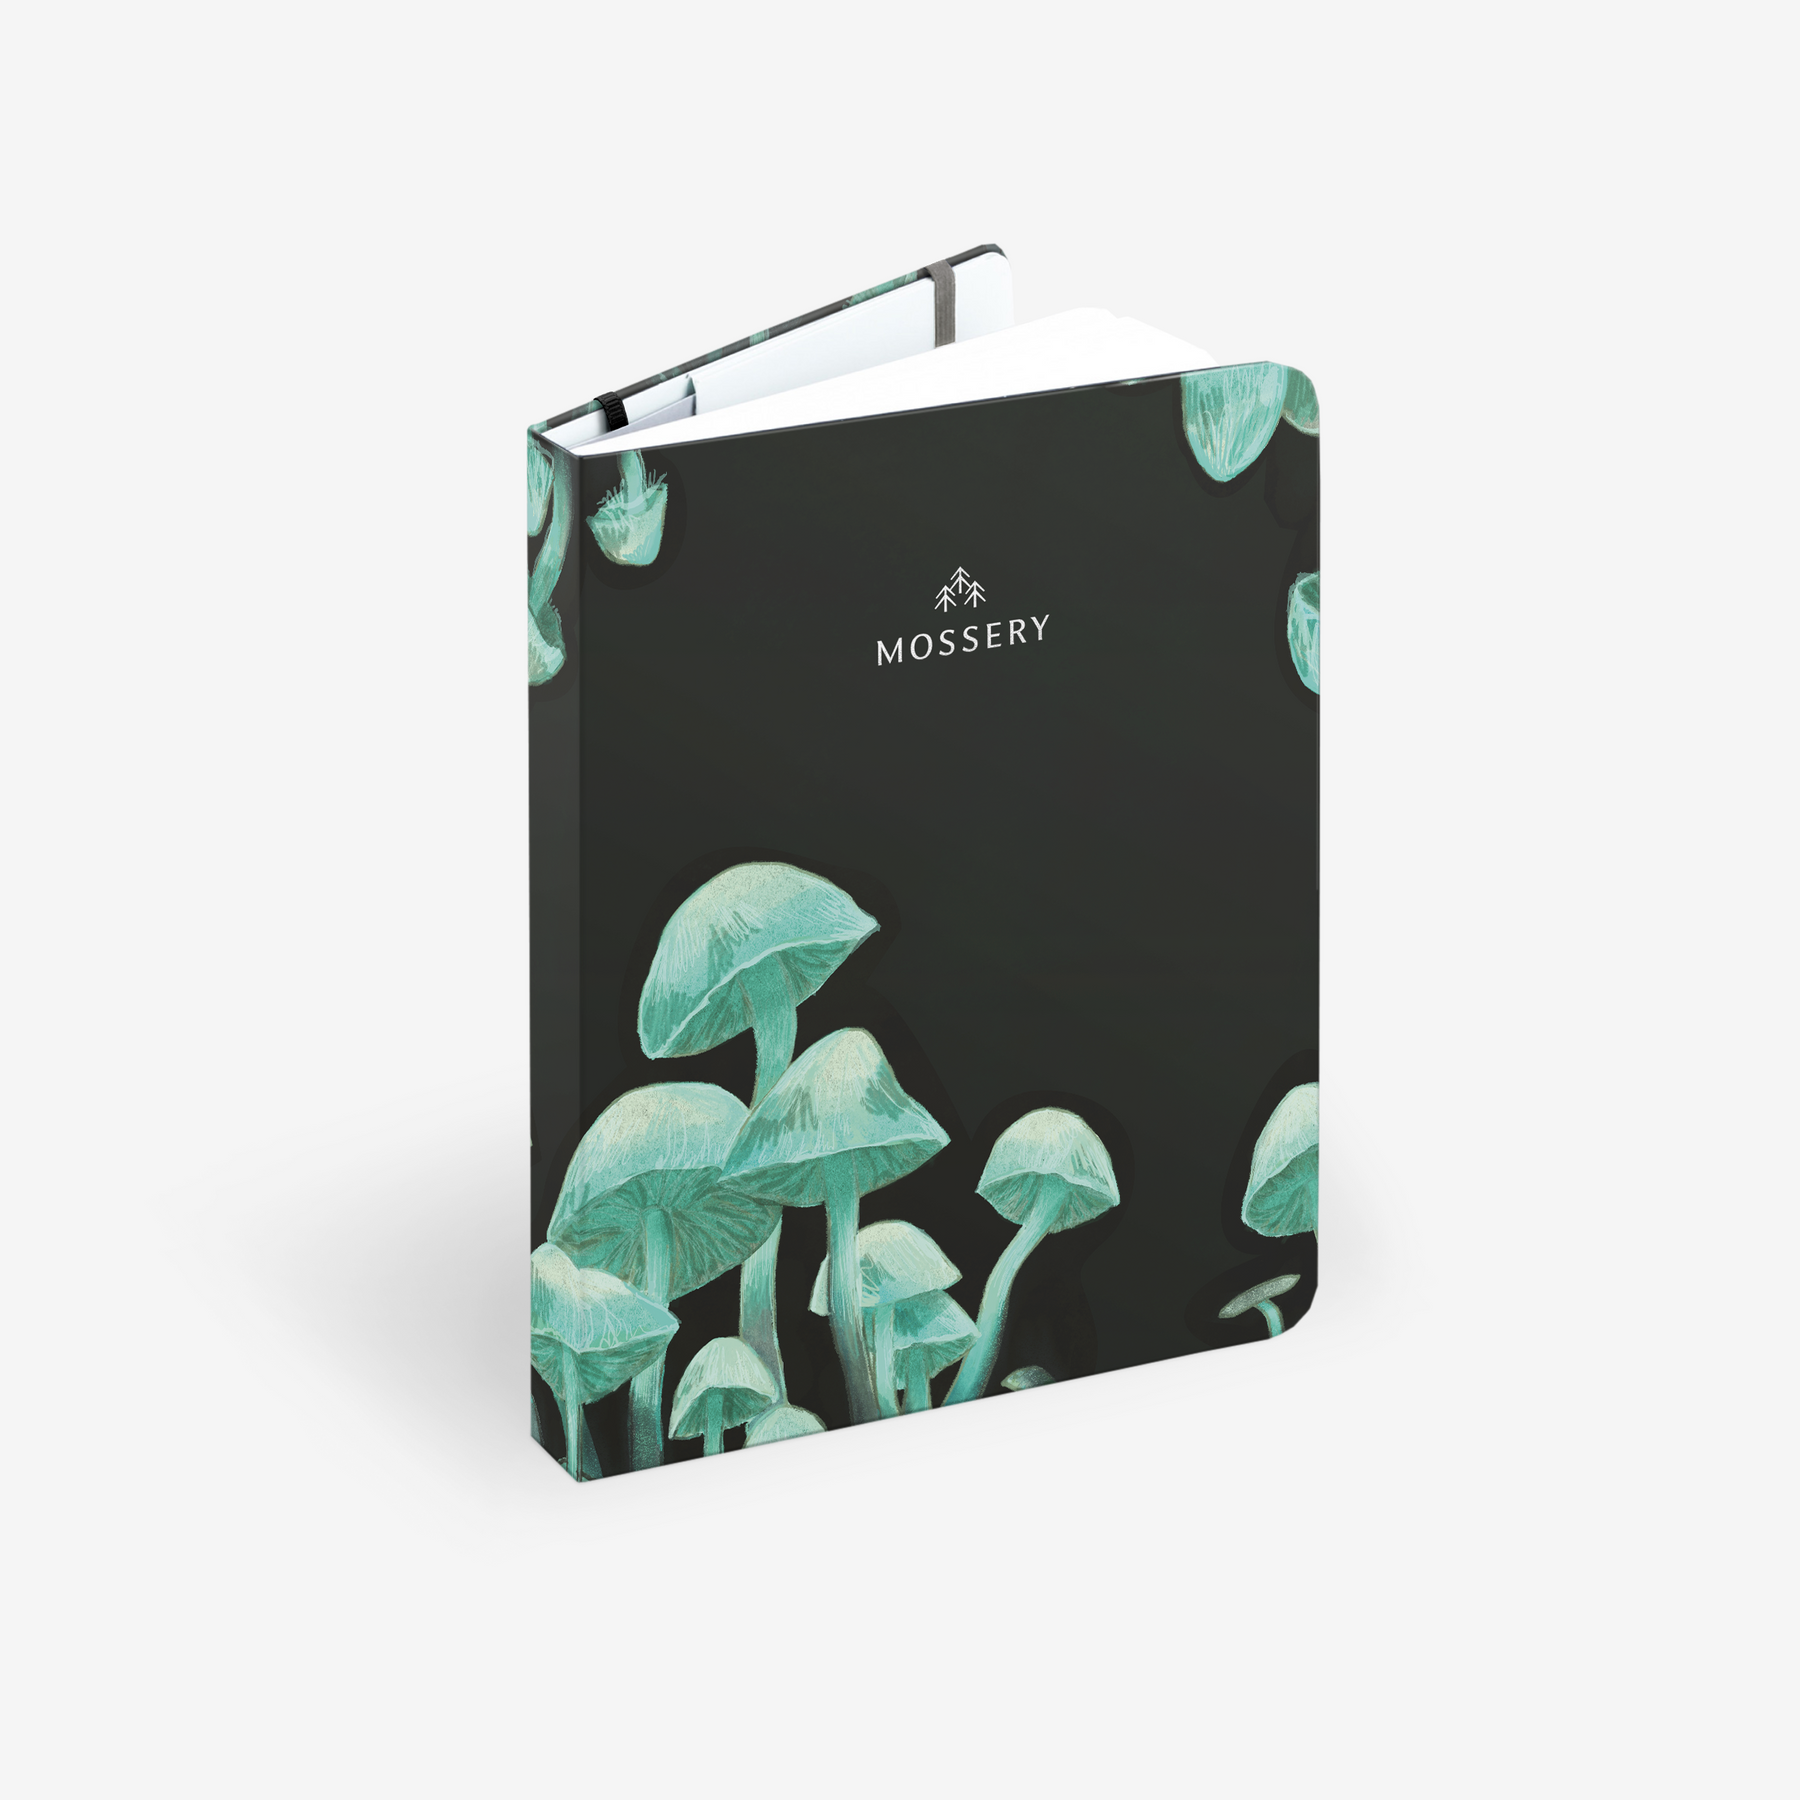 Second Chance: Shroom Cover (Mossery Logo)